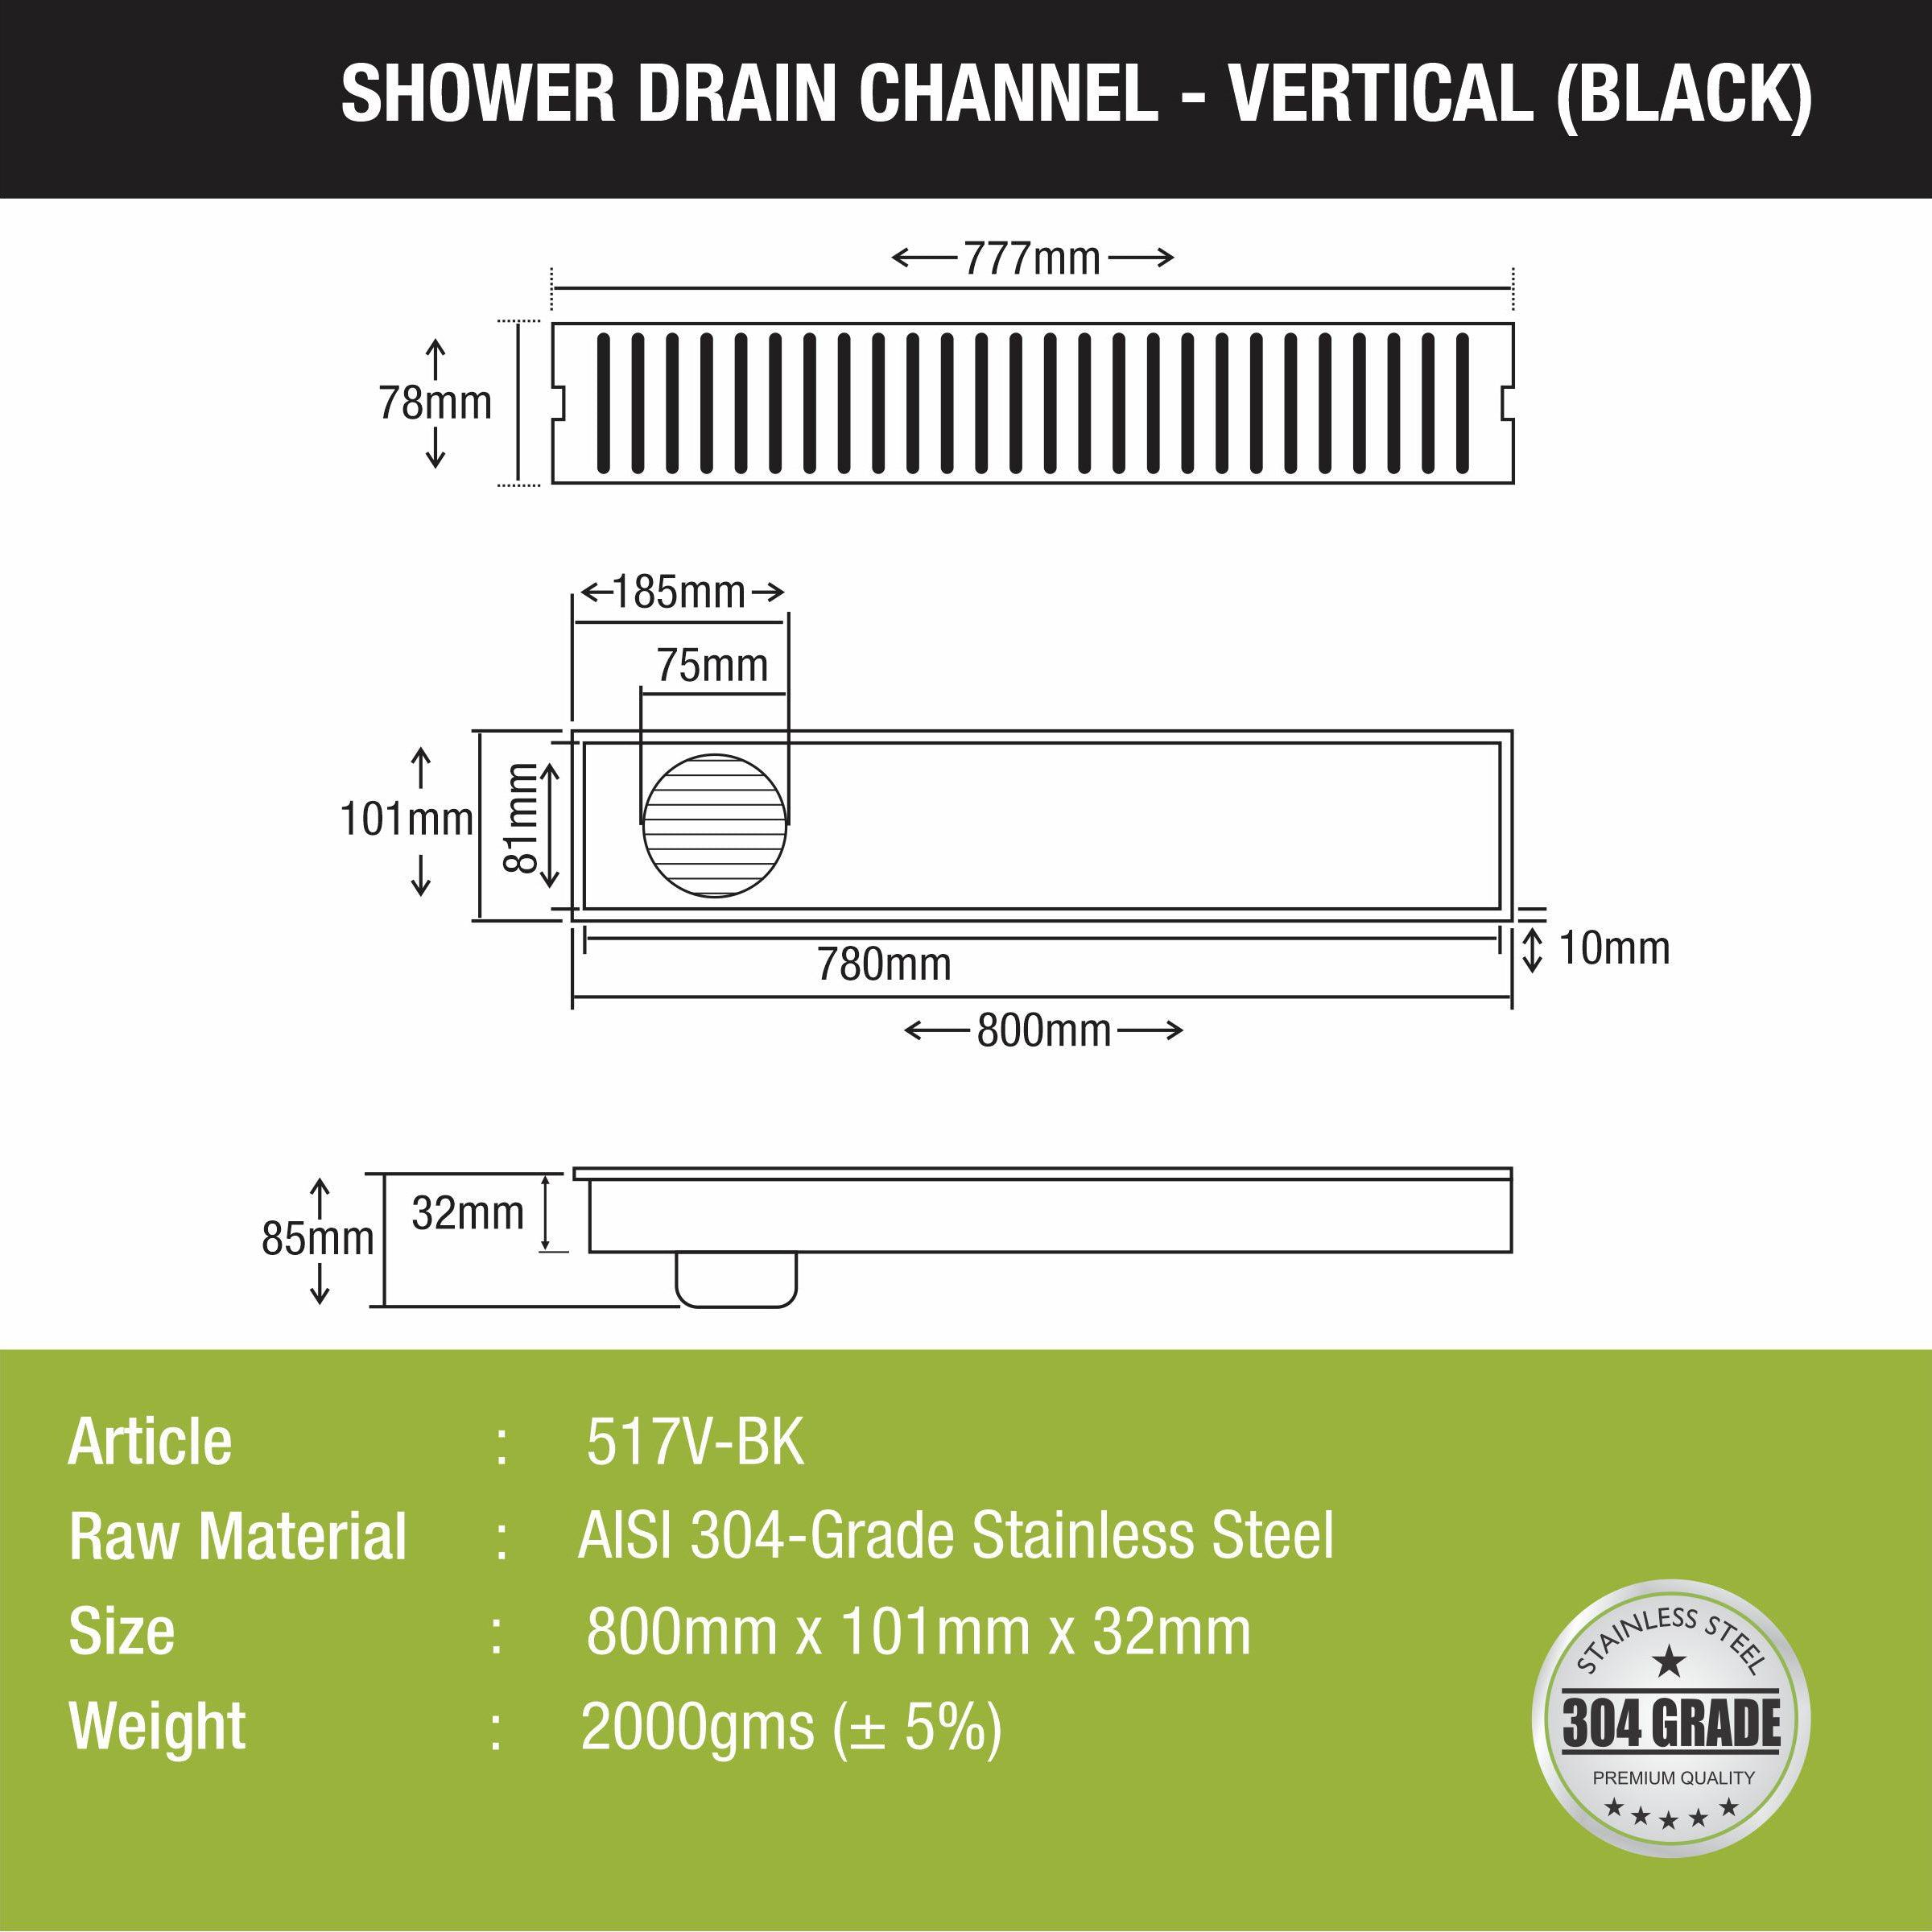 Vertical Shower Drain Channel - Black (32 x 4 Inches) size and measurement